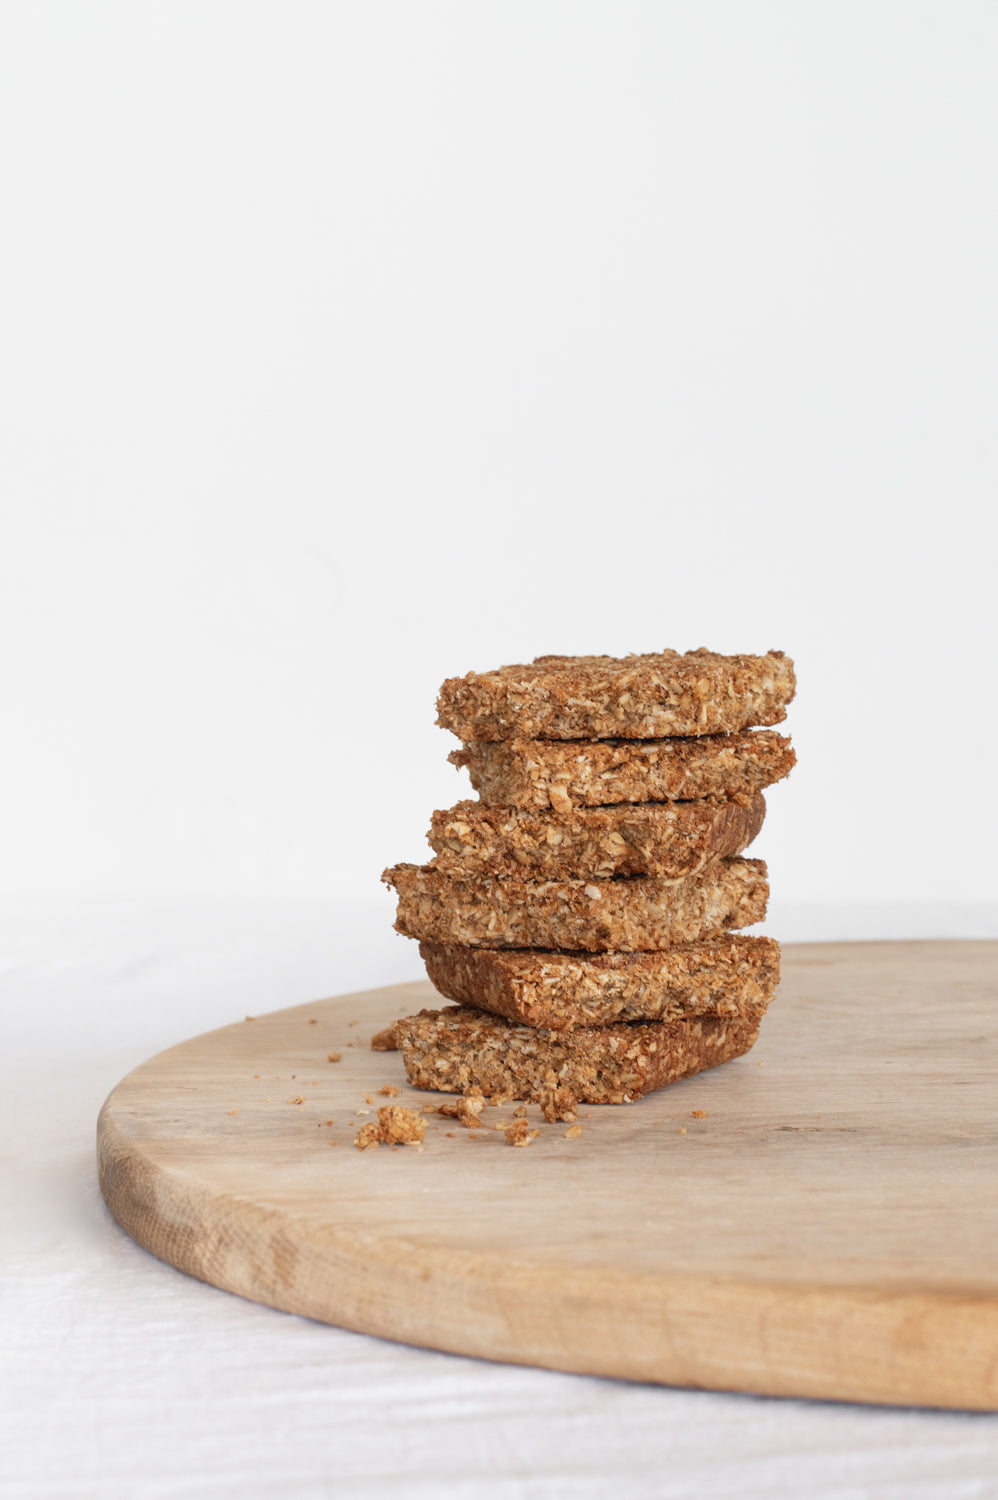 A stack of oat crunchies on a wooden board